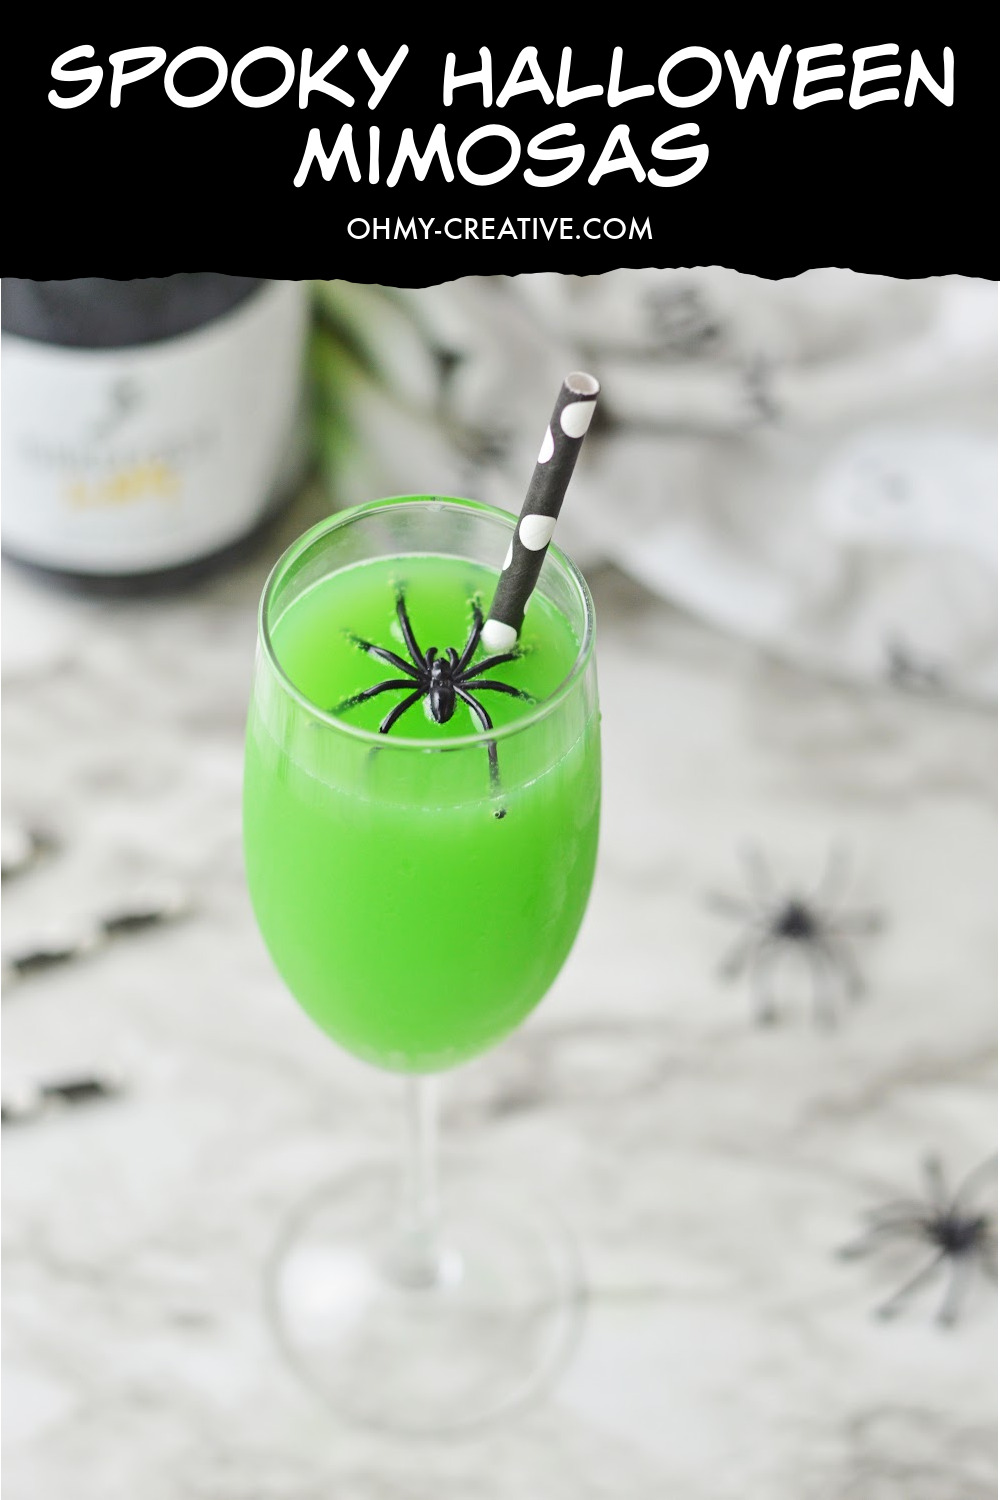 Spooky Halloween Mimosas for a Boo-tiful Party